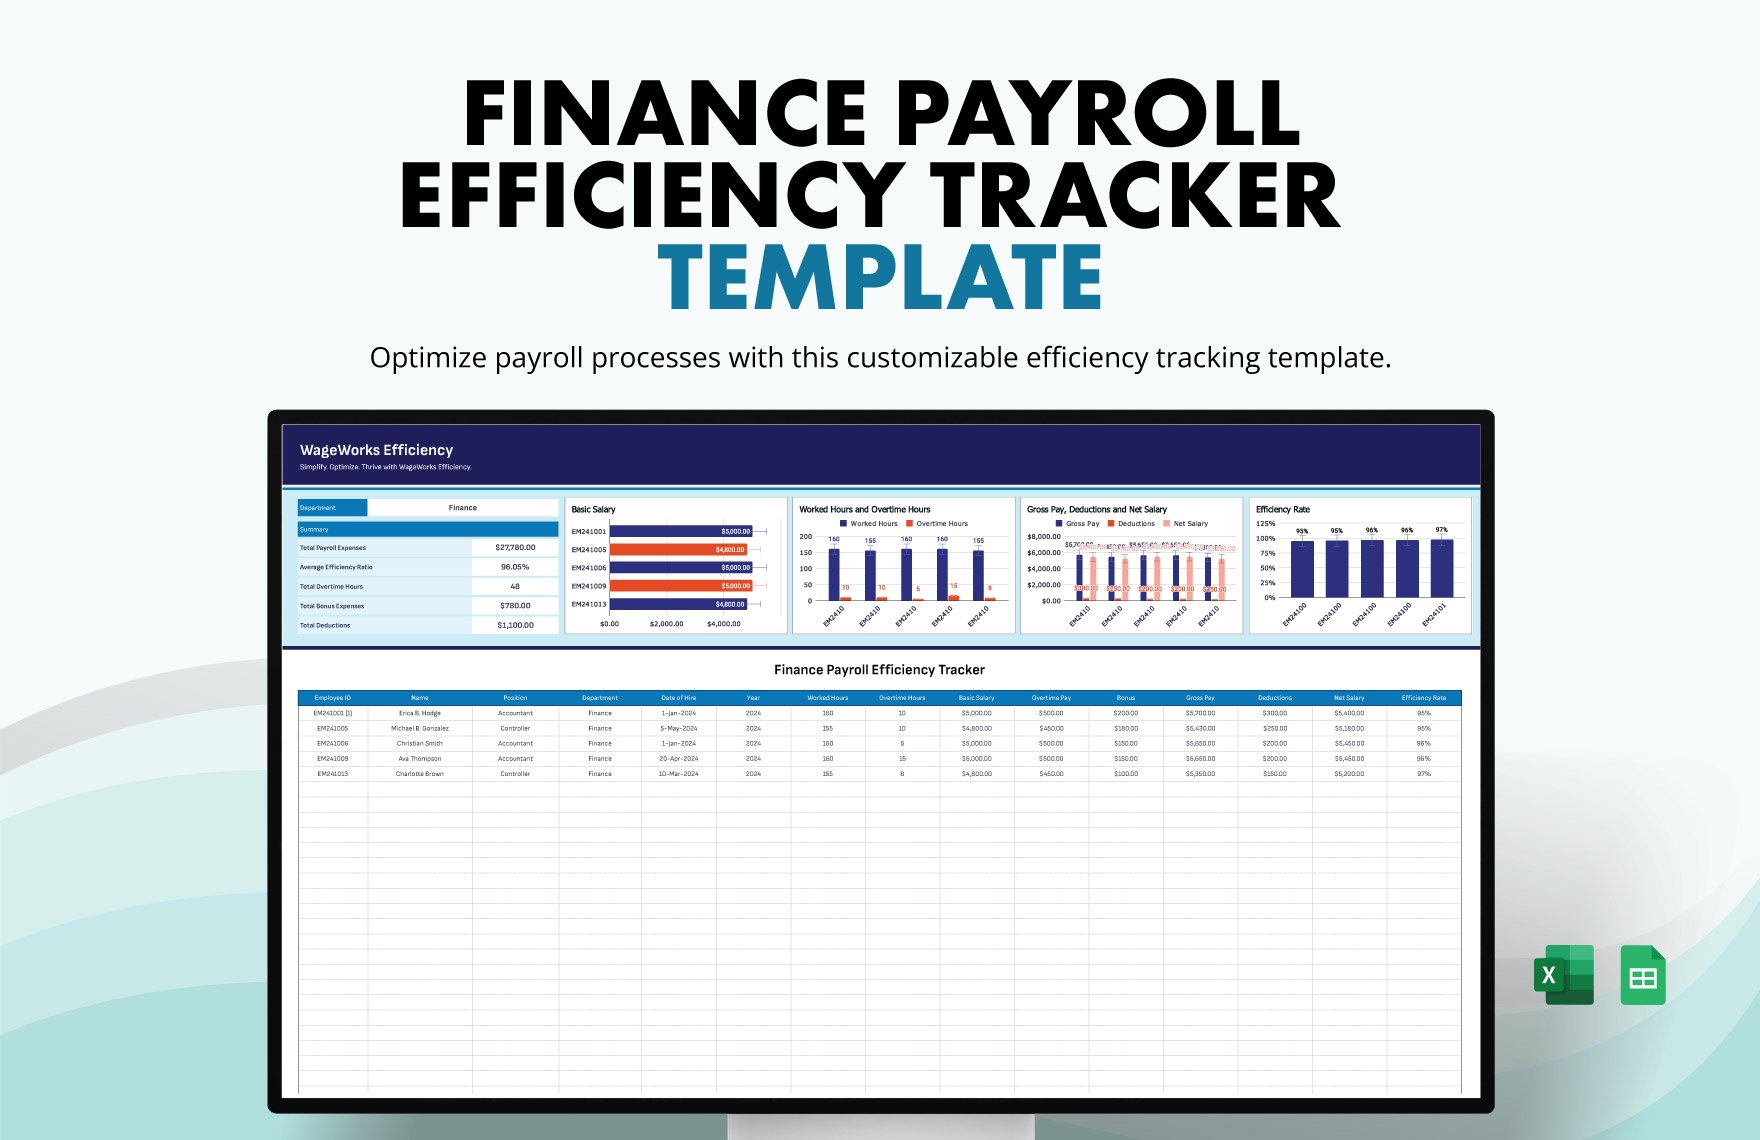 Finance Payroll Efficiency Tracker Template in Excel, Google Sheets